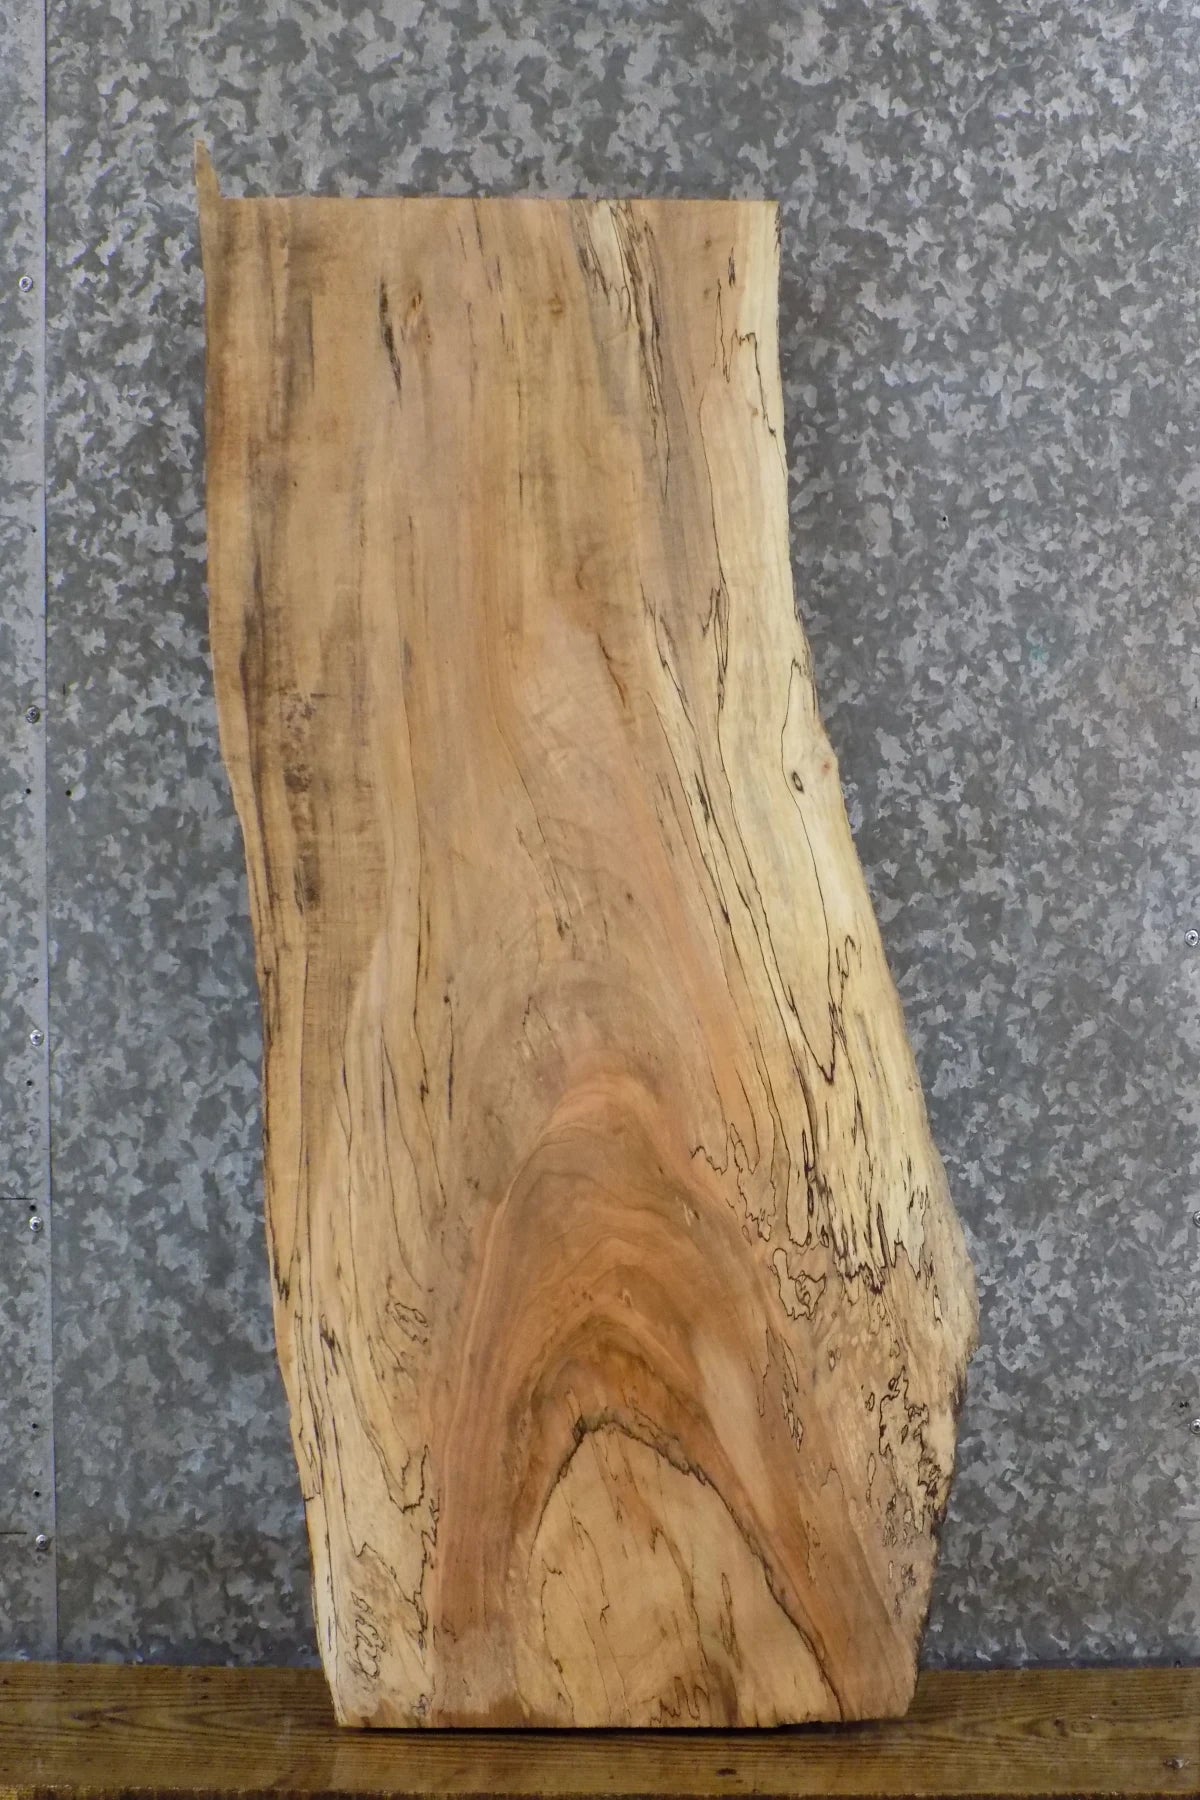 Live Edge Spalted Maple Coffee Table Top Wood Slab 748